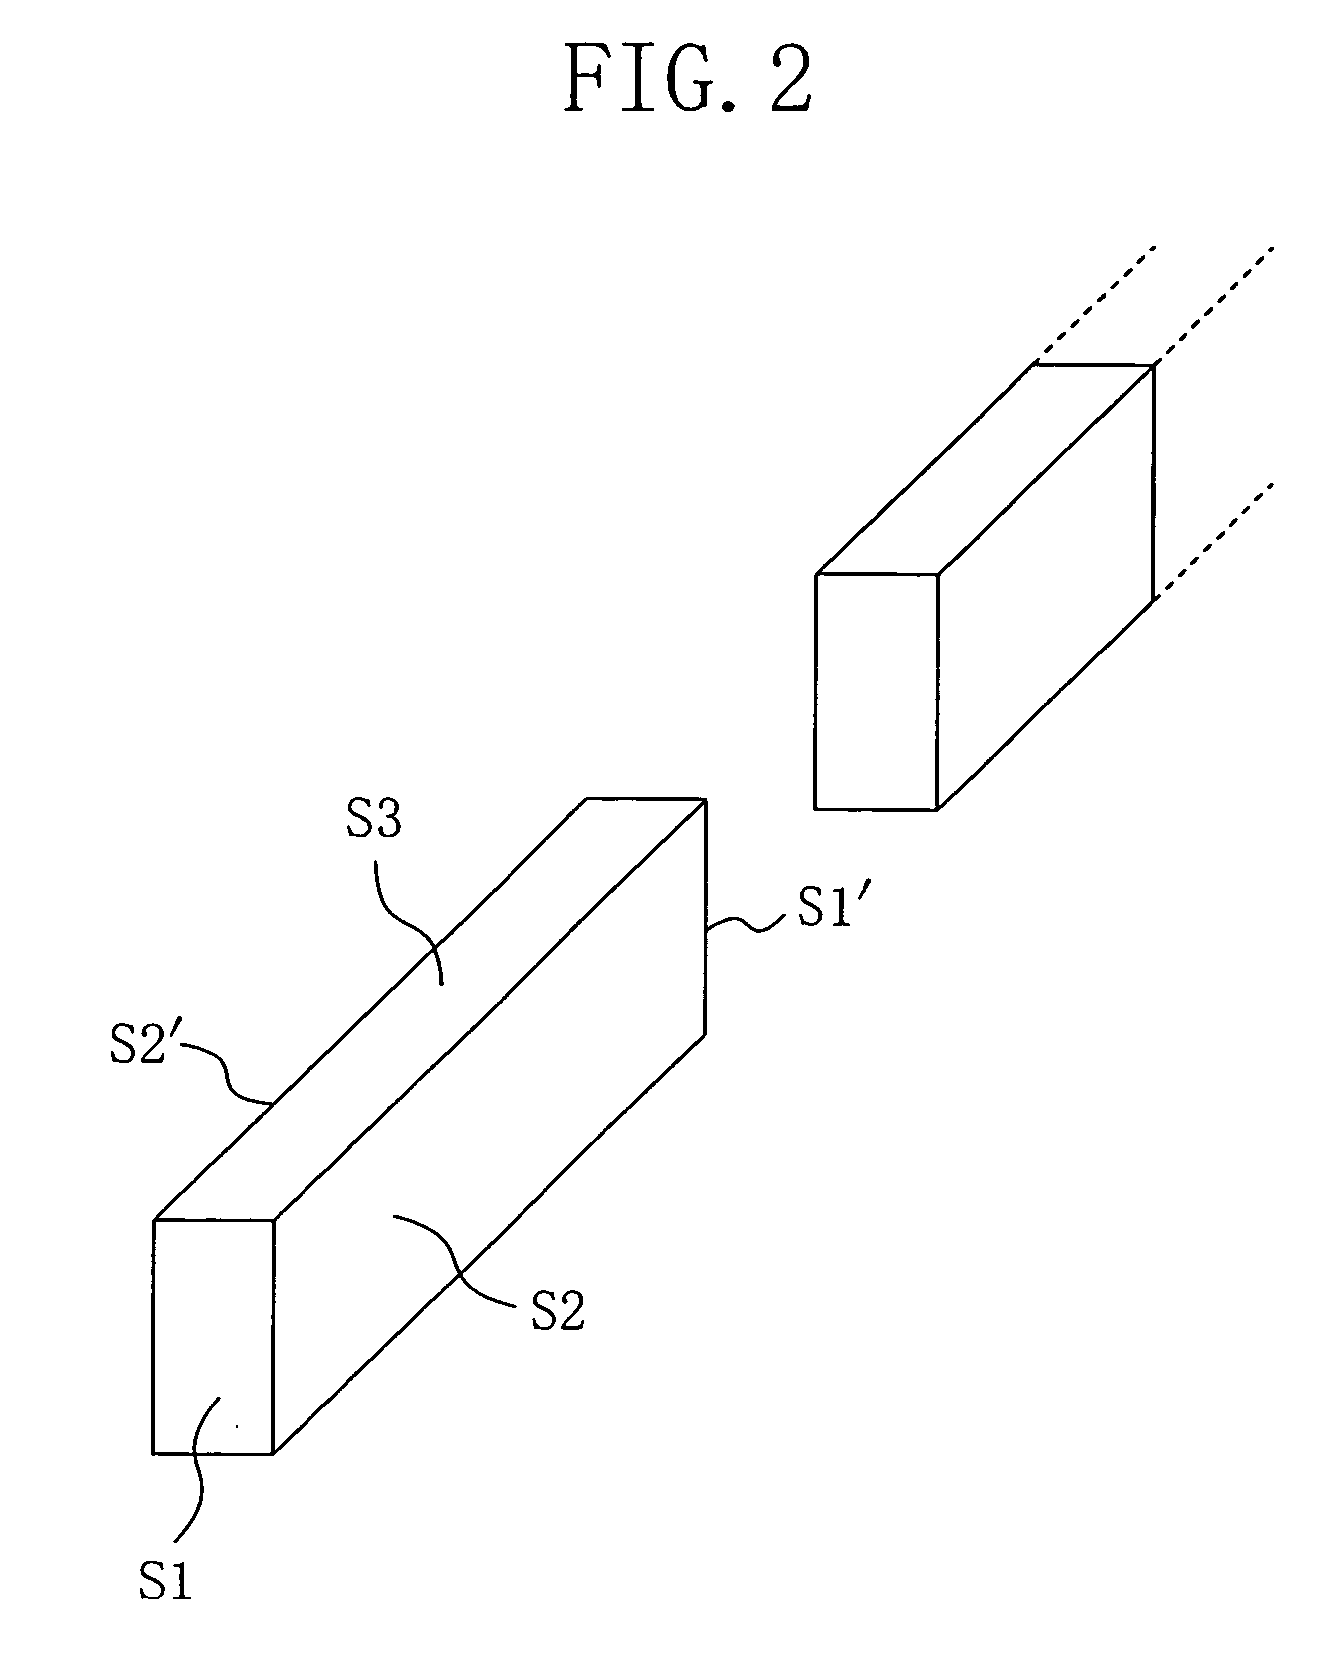 Method for variability constraints in design of integrated circuits especially digital circuits which includes timing closure upon placement and routing of digital circuit or network